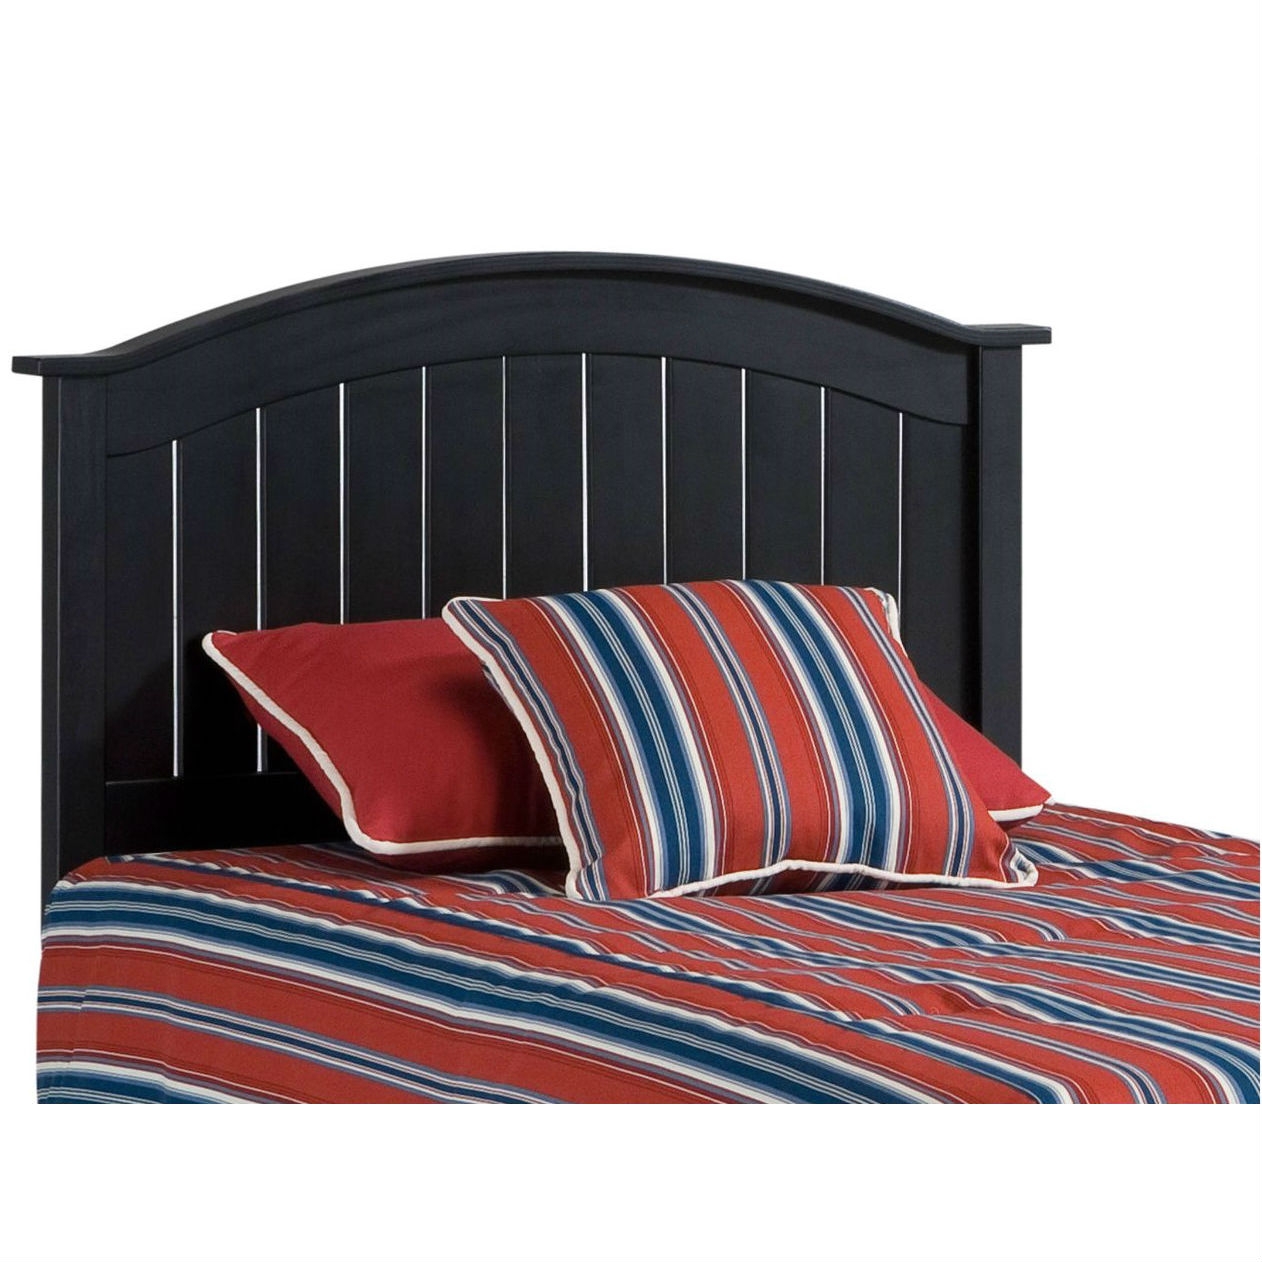 Twin size Solid Wood Arch Panel Headboard in Black